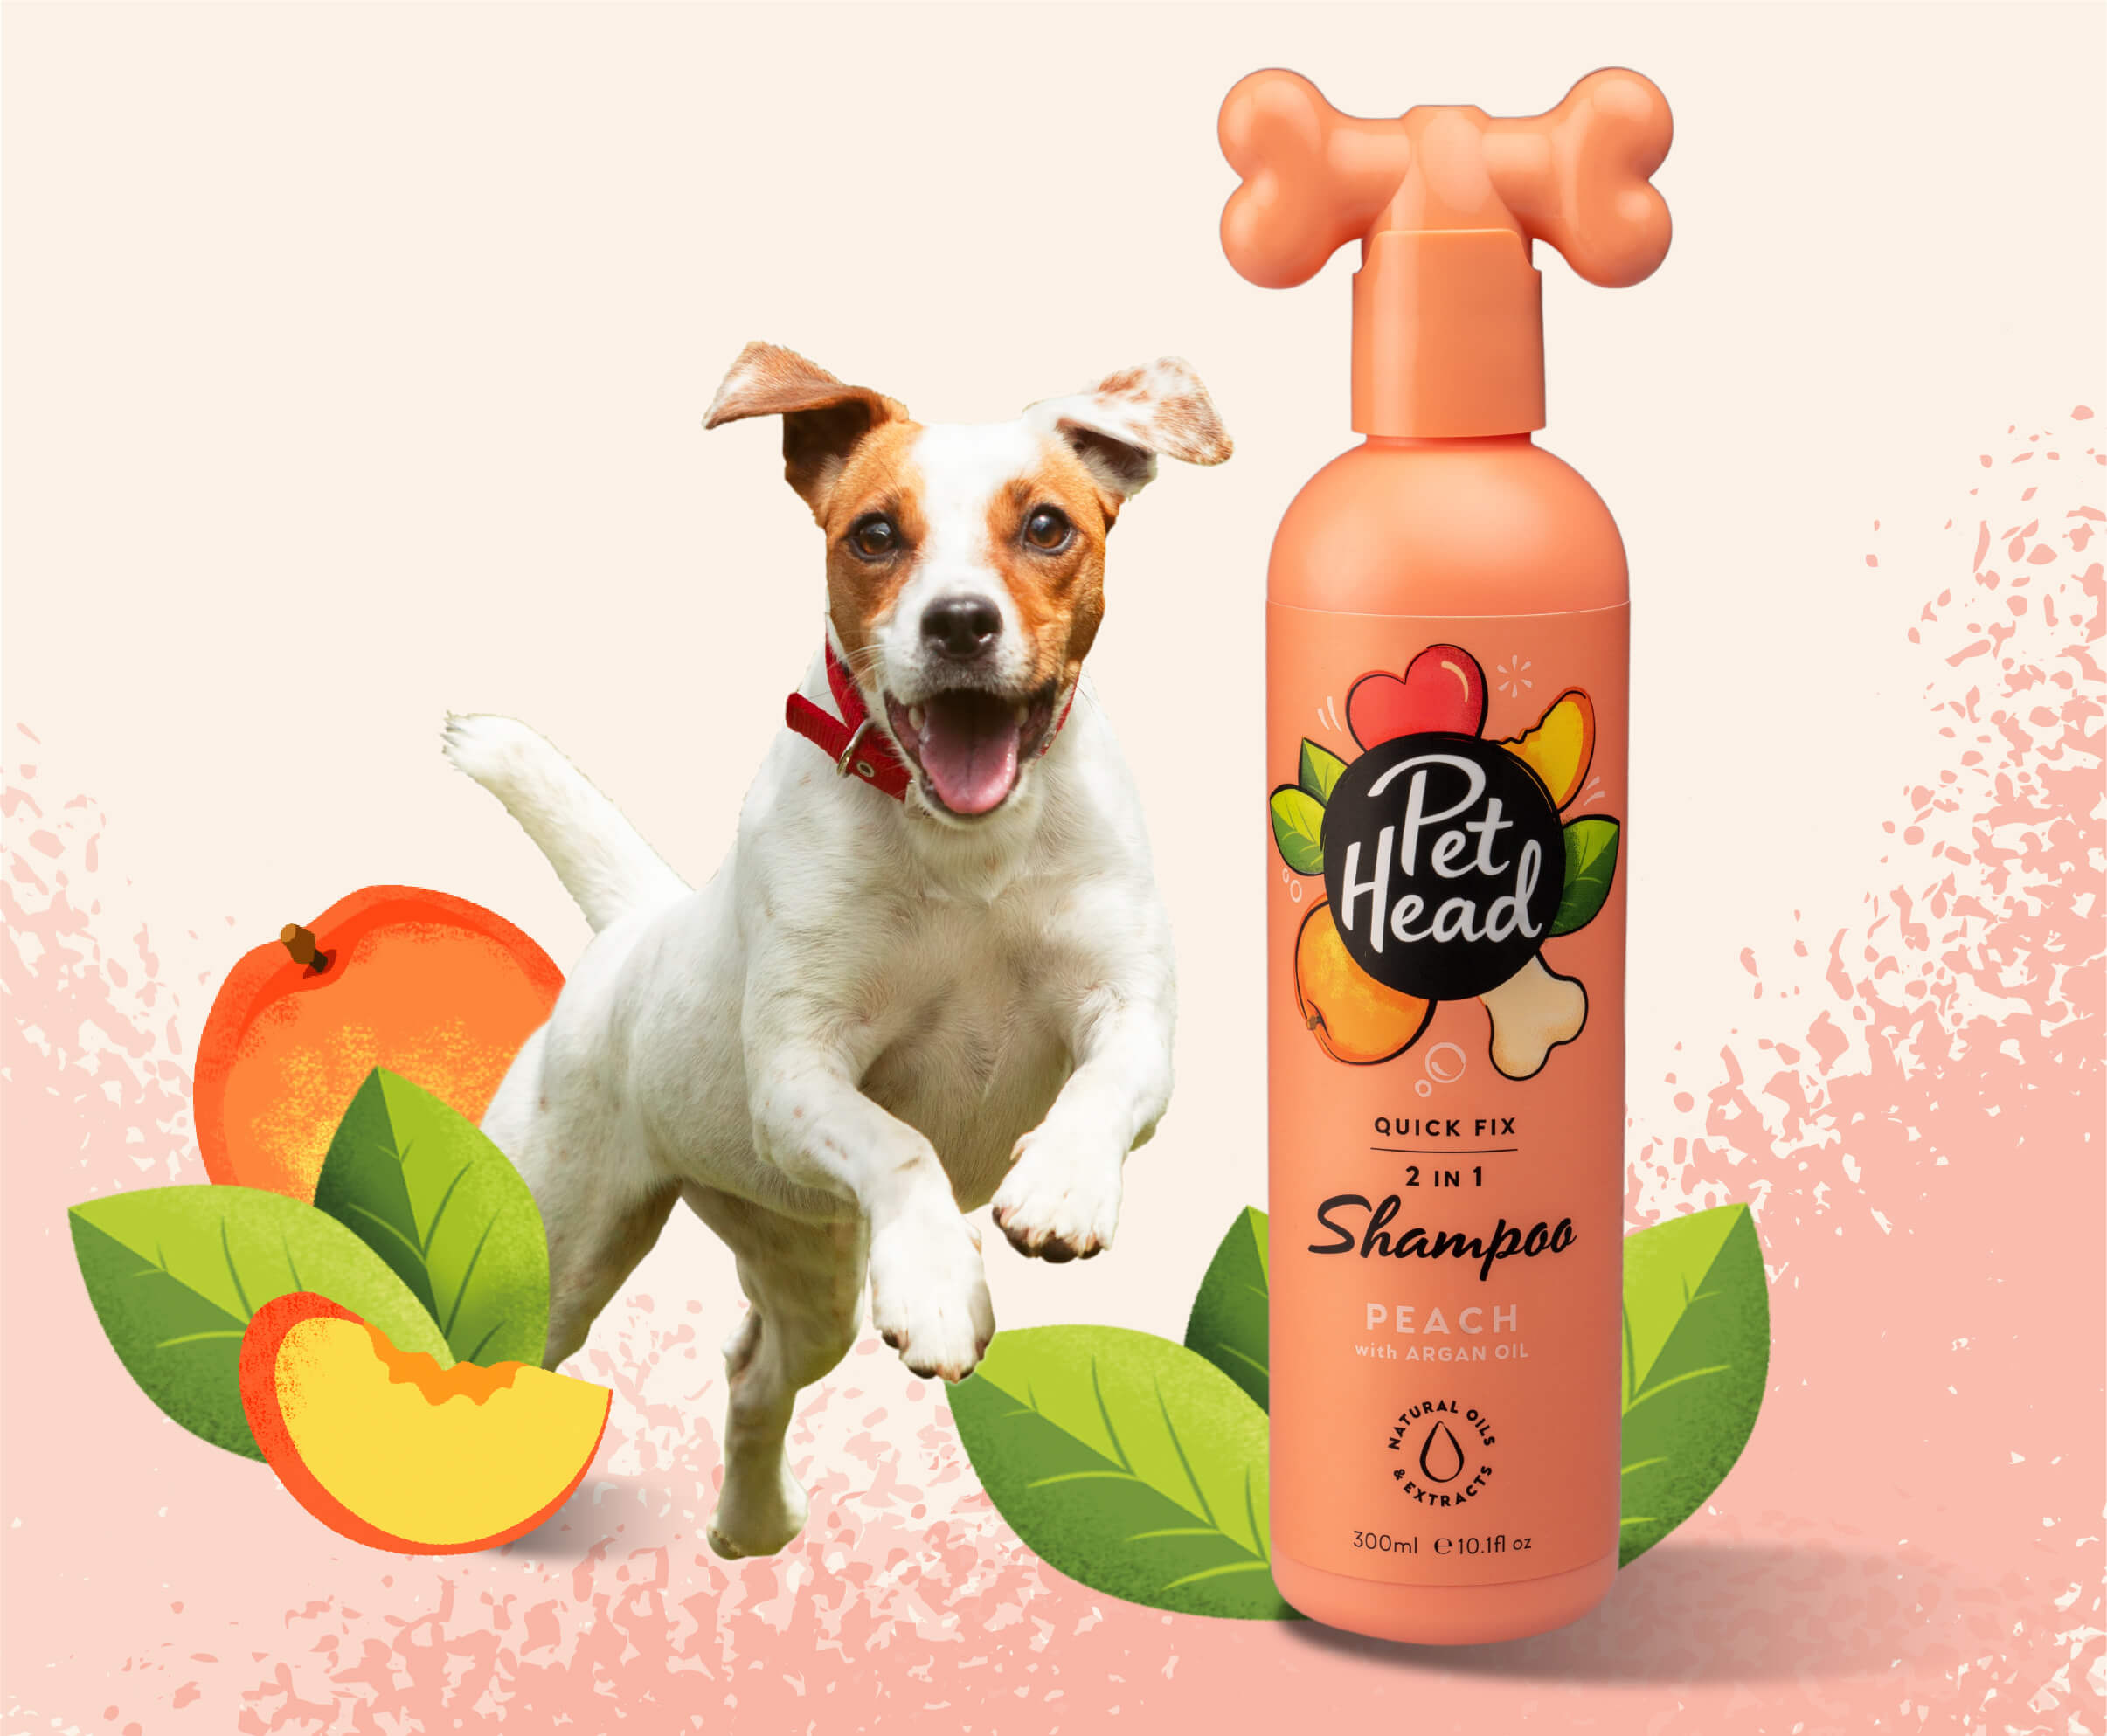 Product shot of the Pet Head Quick Fix Shampoo next to a happy dog